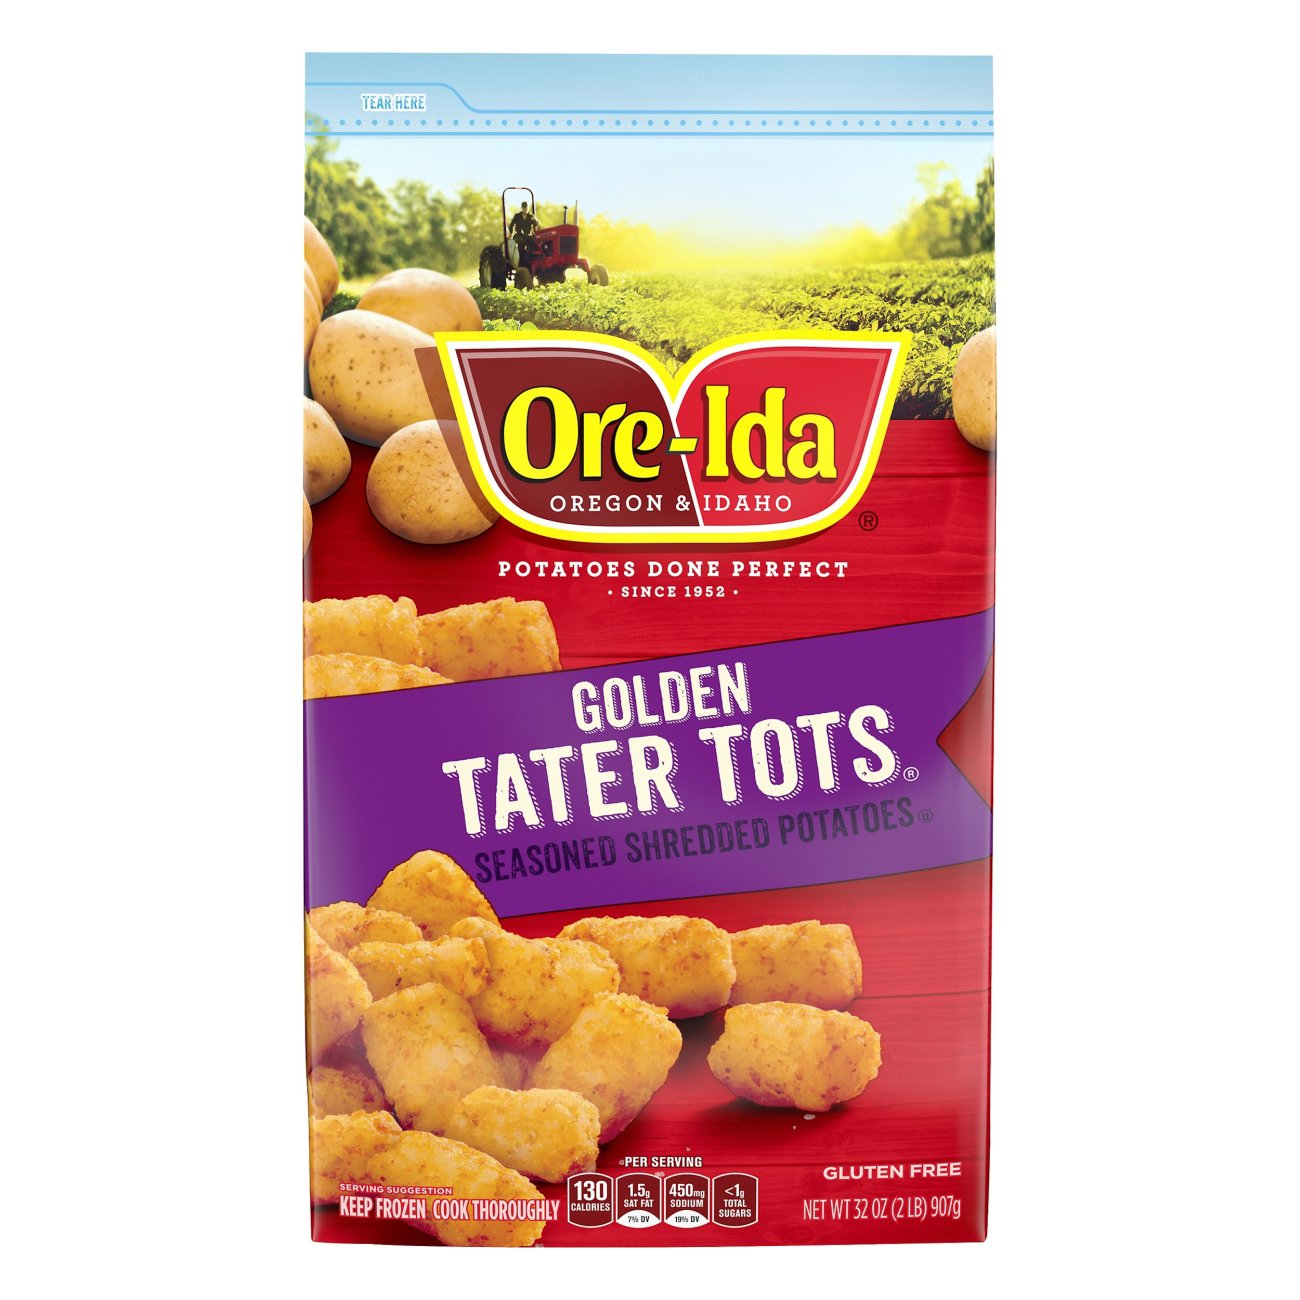 Tots copyrighted tater is